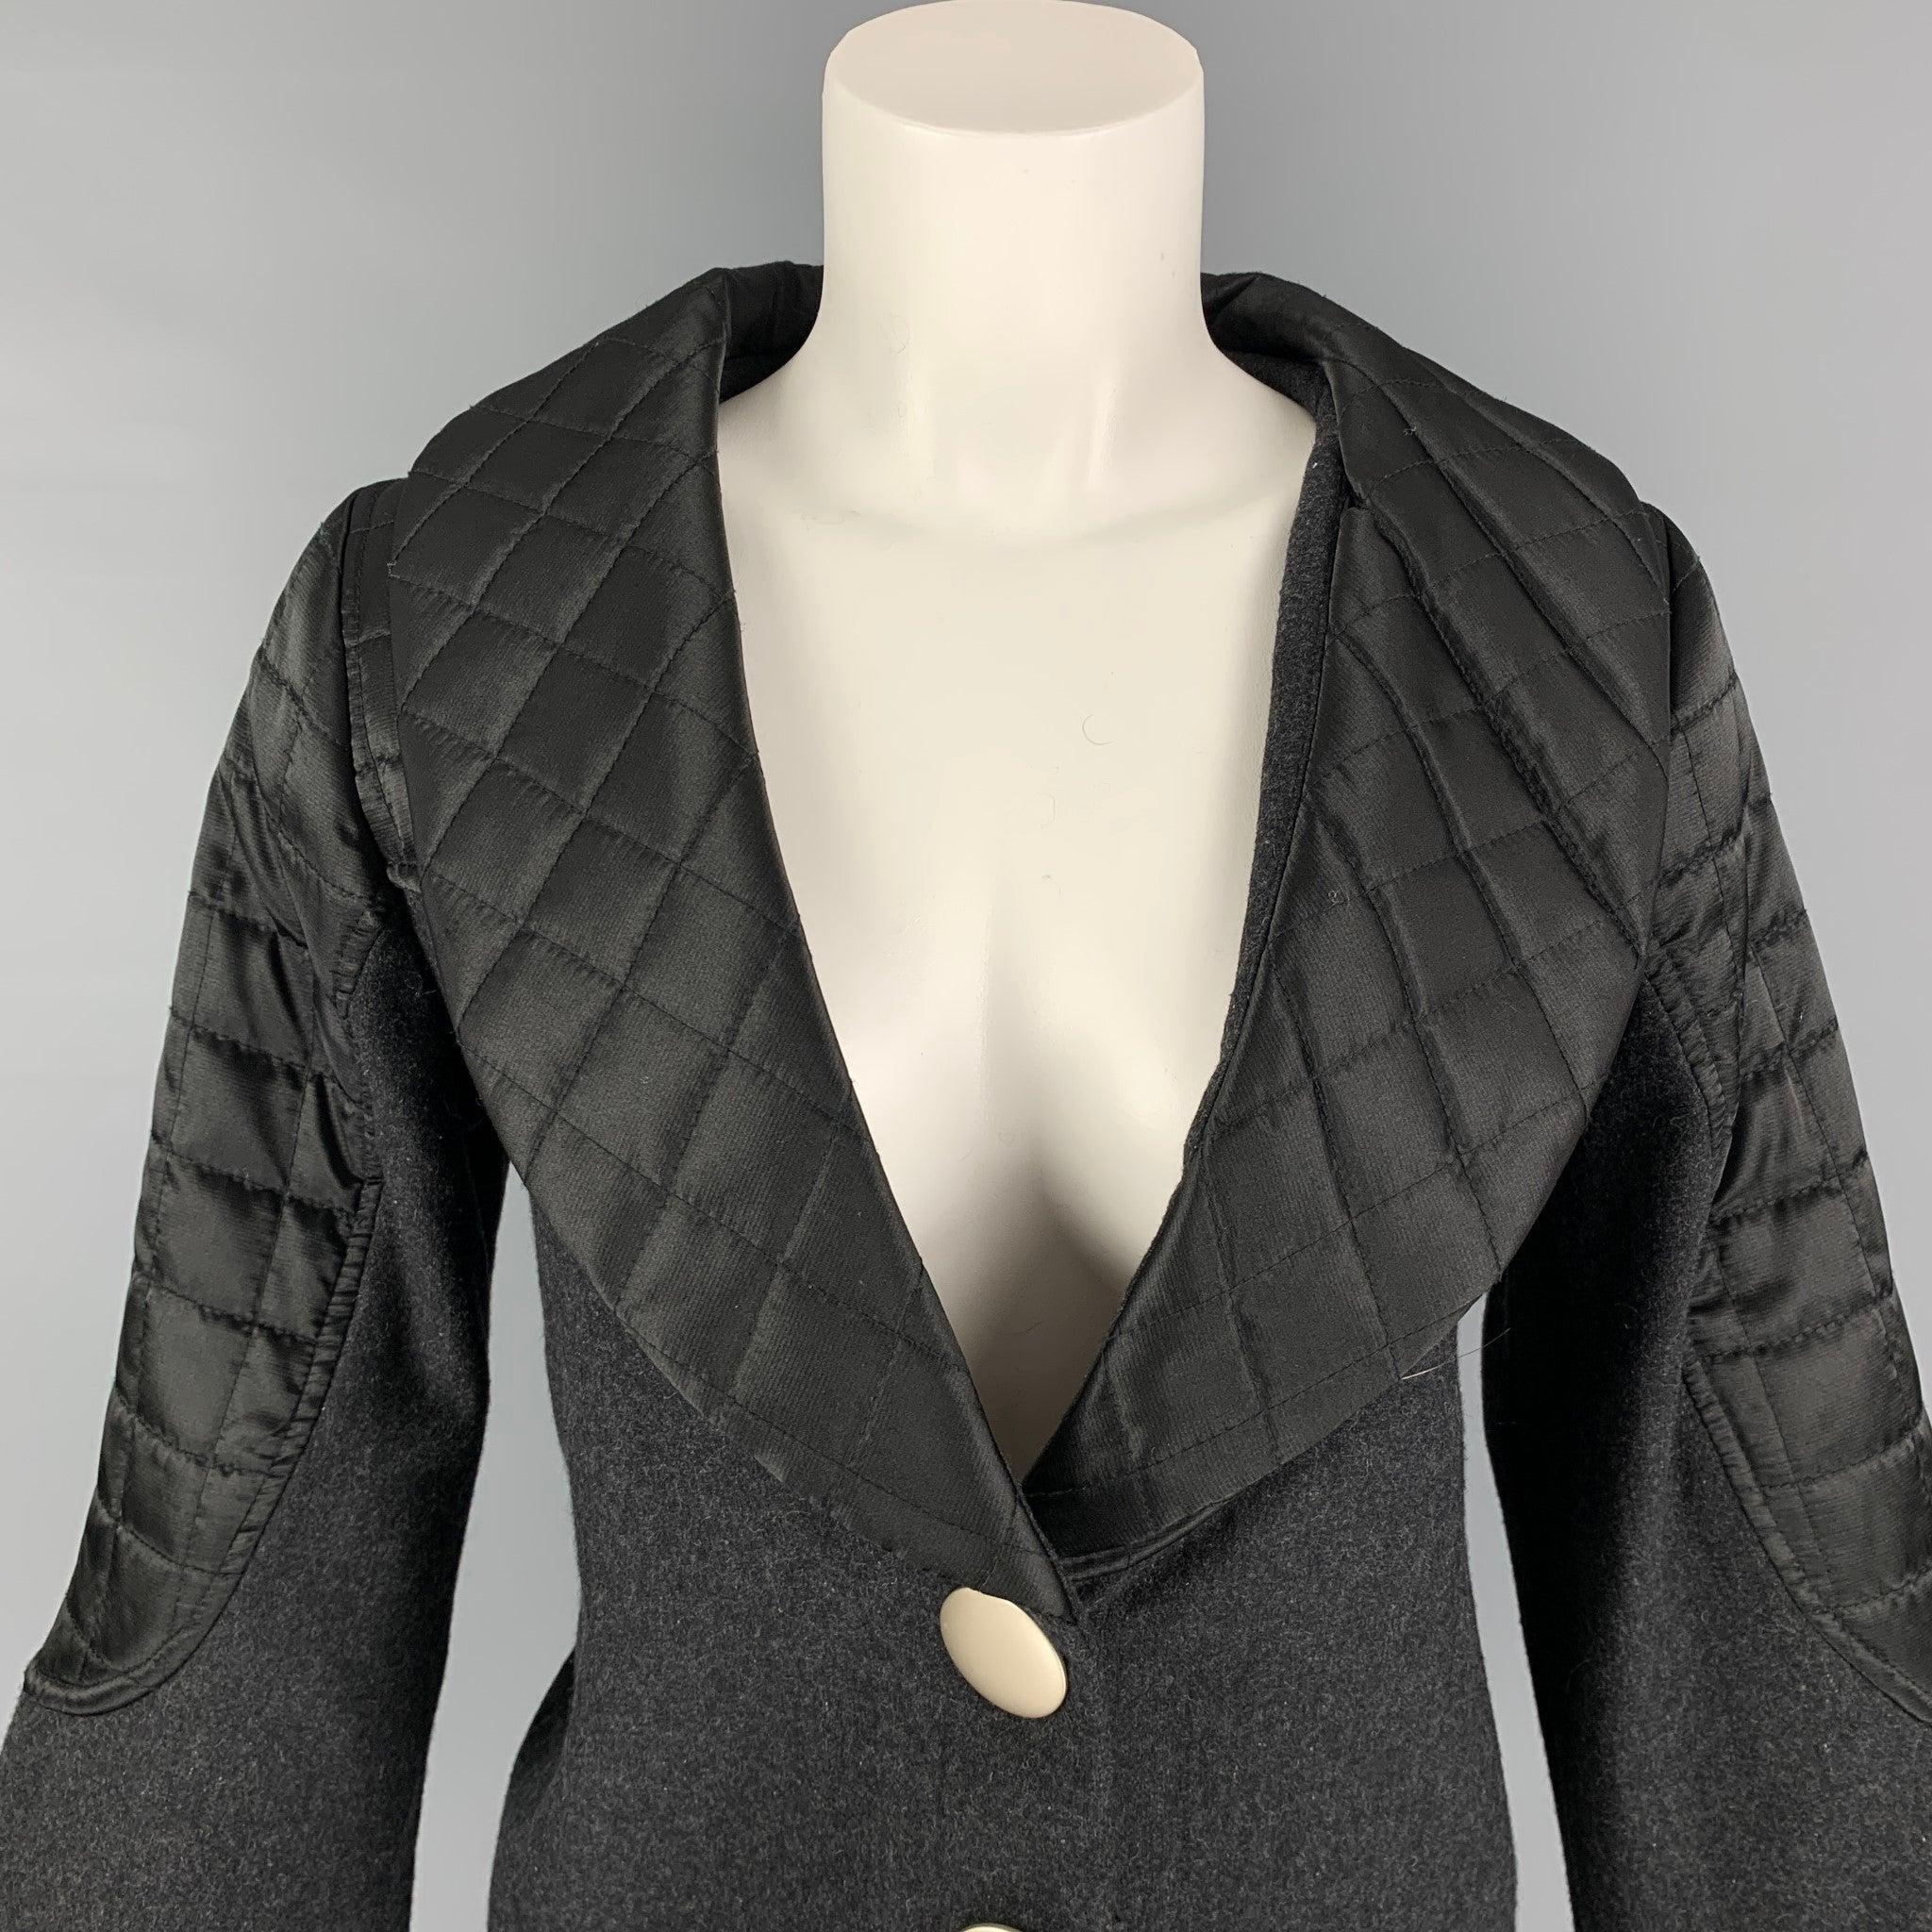 MARC by MARC JACOBS jacket comes in a grey wool with a full liner featuring black quilted panels, shawl collar, and a two button closure.
Very Good
Pre-Owned Condition. 

Marked:   2 

Measurements: 
 
Shoulder: 15 inches  Bust: 34 inches 